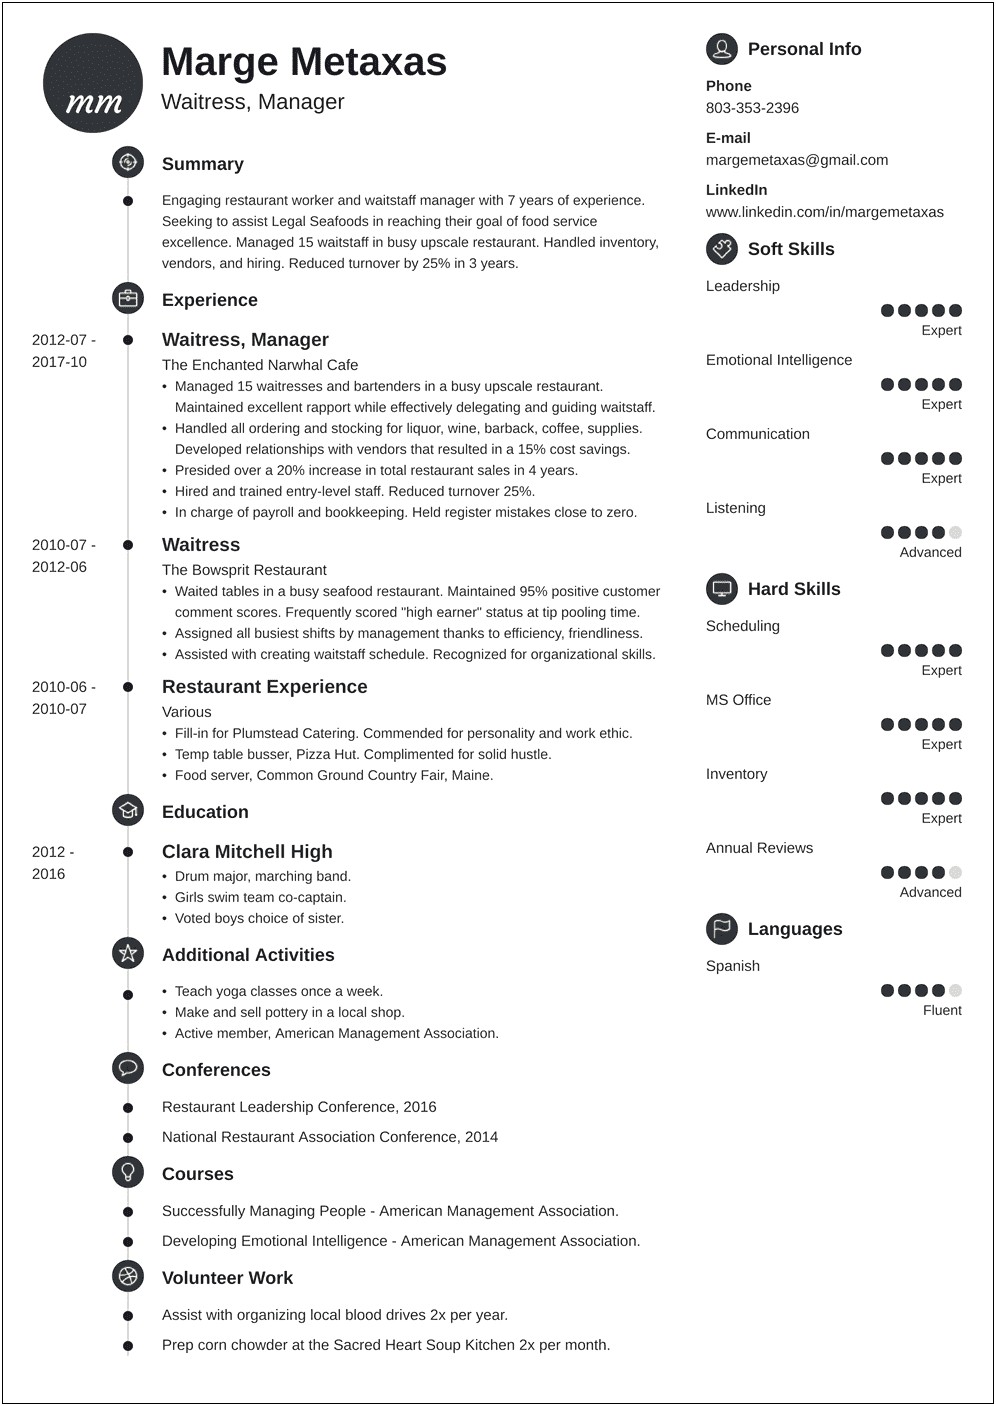 Resume Examples With Restaurant Experience